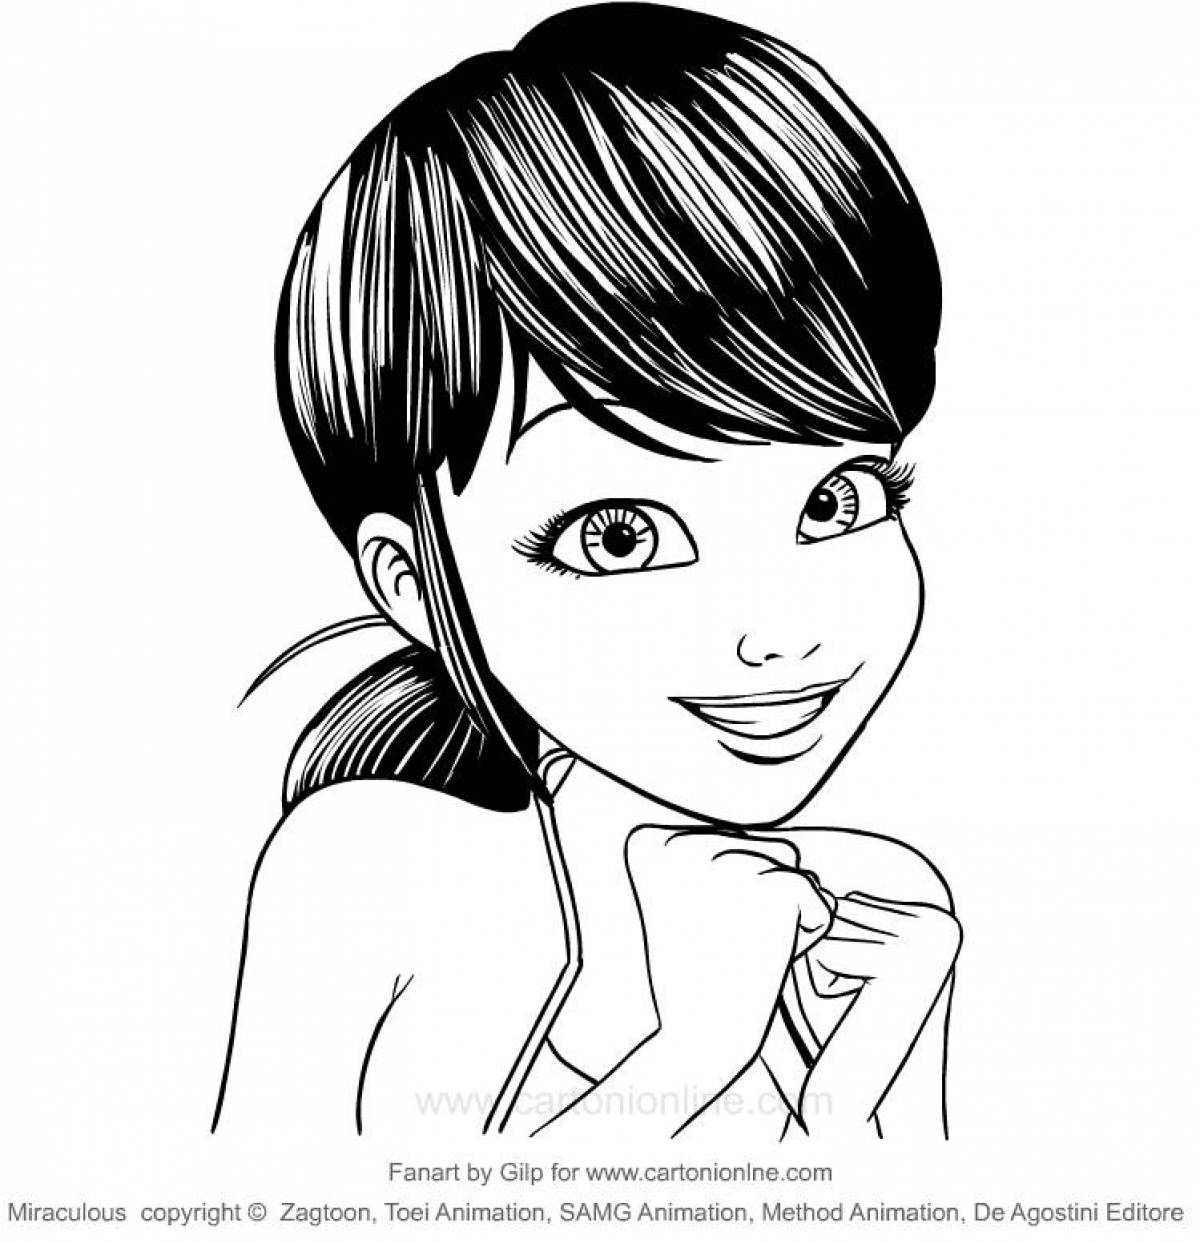 Marinette's adorable coloring page